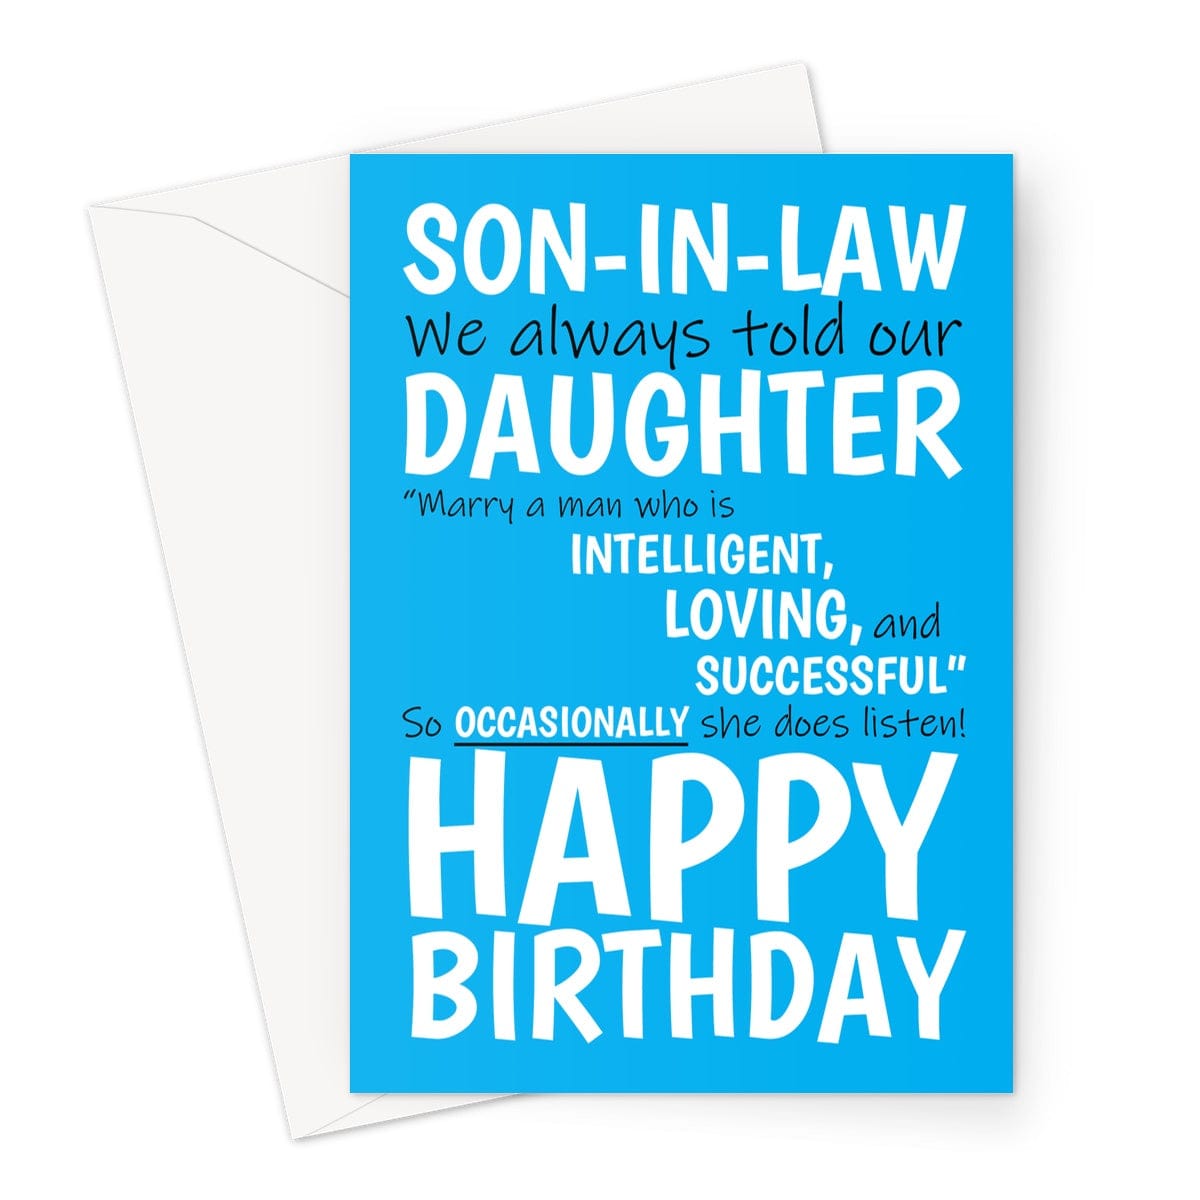 A funny blue birthday card for a son-in-law.